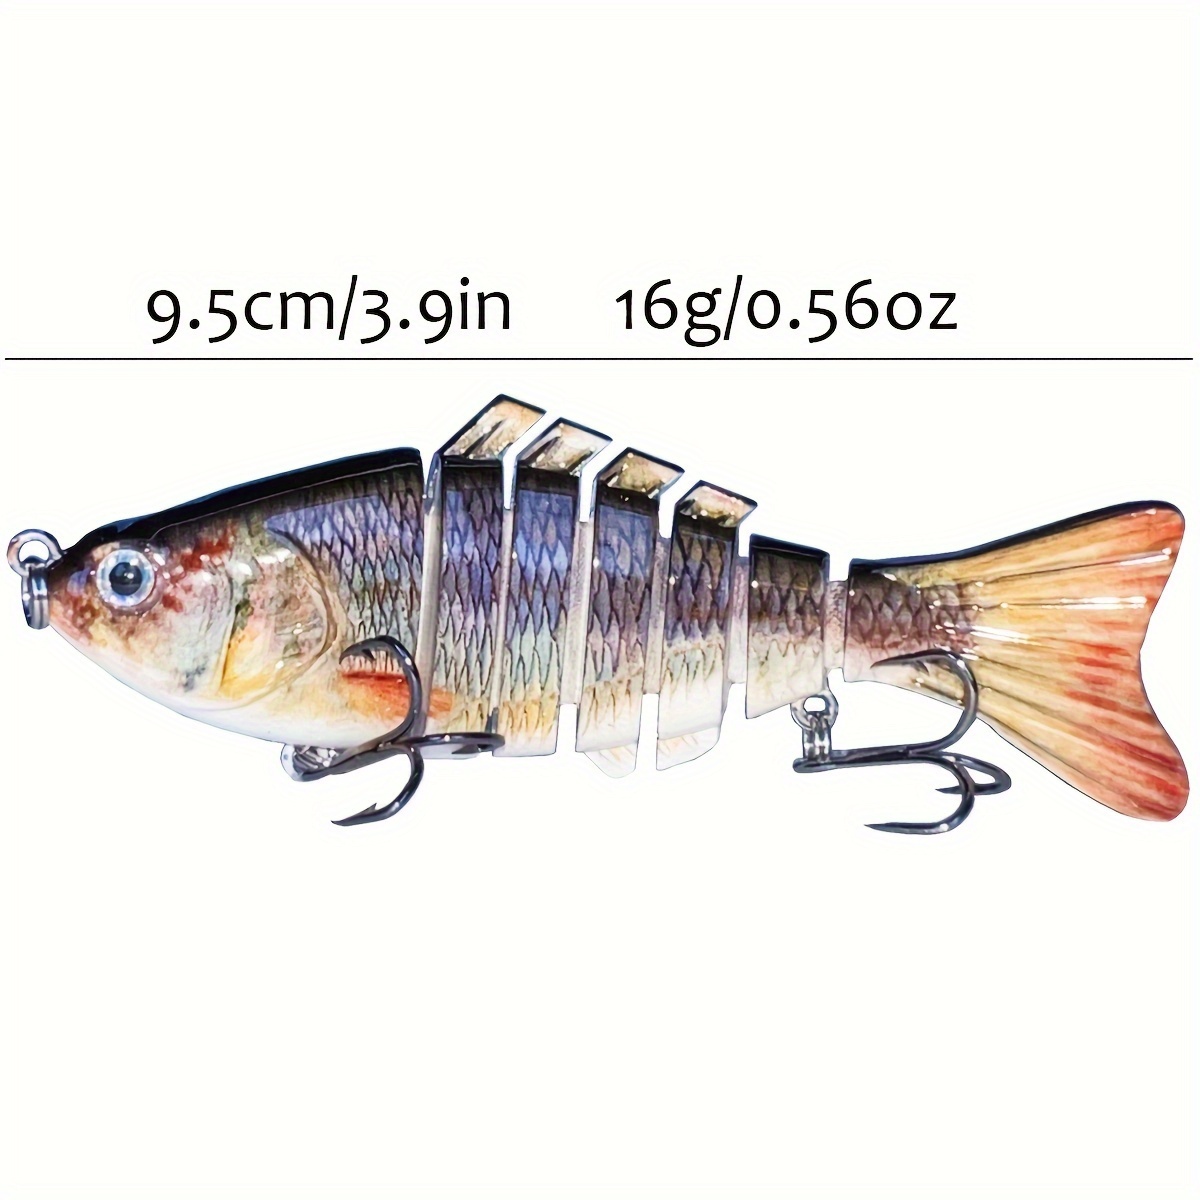 Lfemro 5Pcs Fishing Lures for Bass Topwater Trout Lures Multi